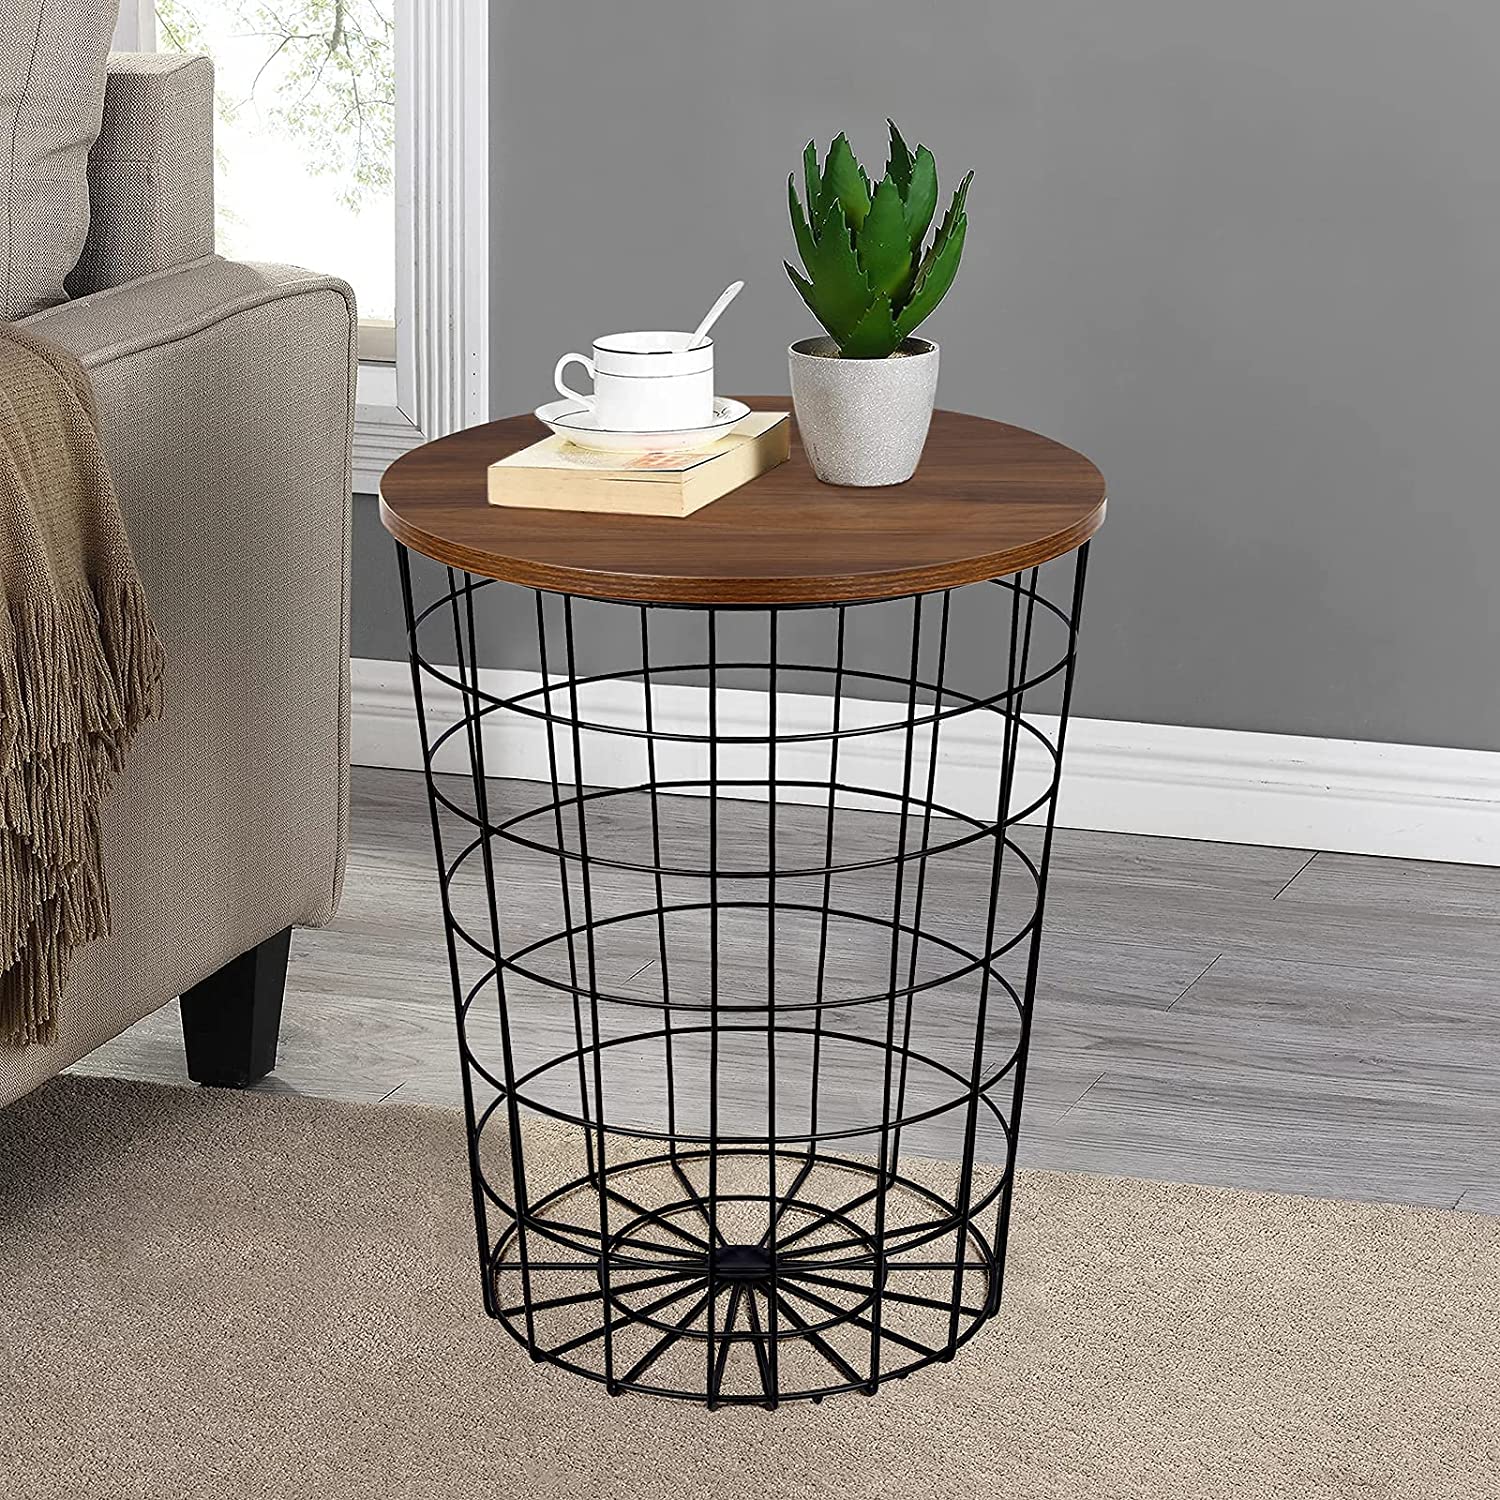 Nest Of Tables Set of 2 Convertible Round Metal Basket Living Room Storage with Wood Tabletop, Accent Side Table with Storage 